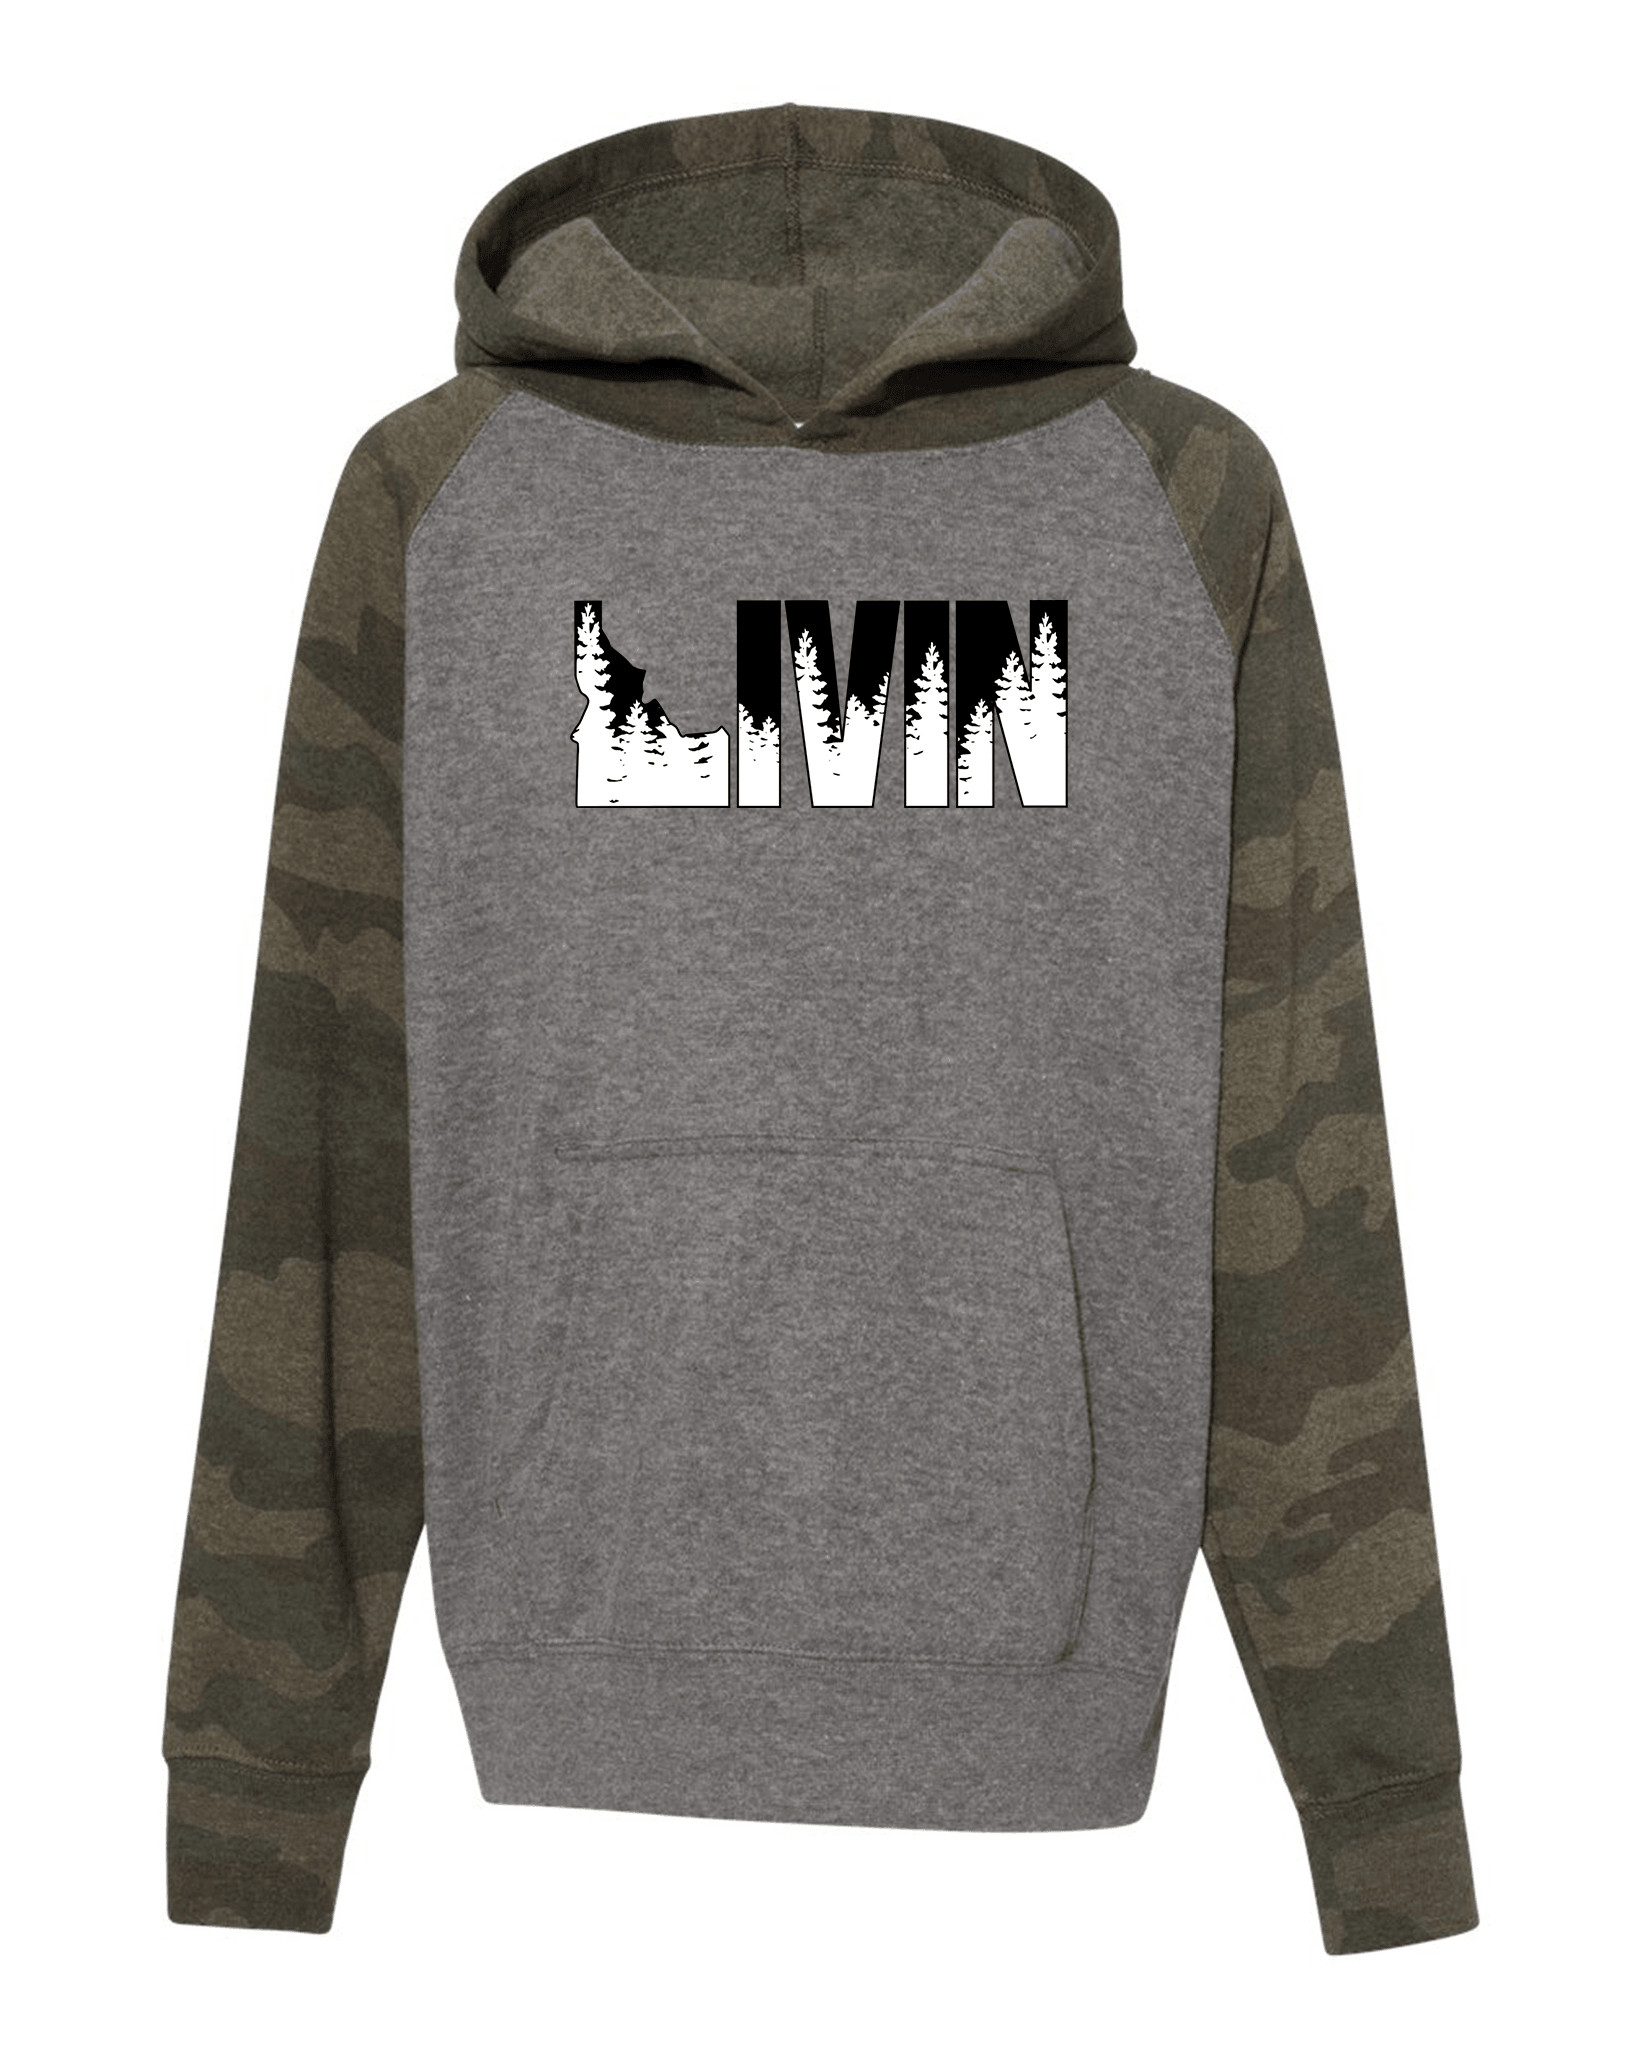 Forest Youth Hoodie - Idaho Livin